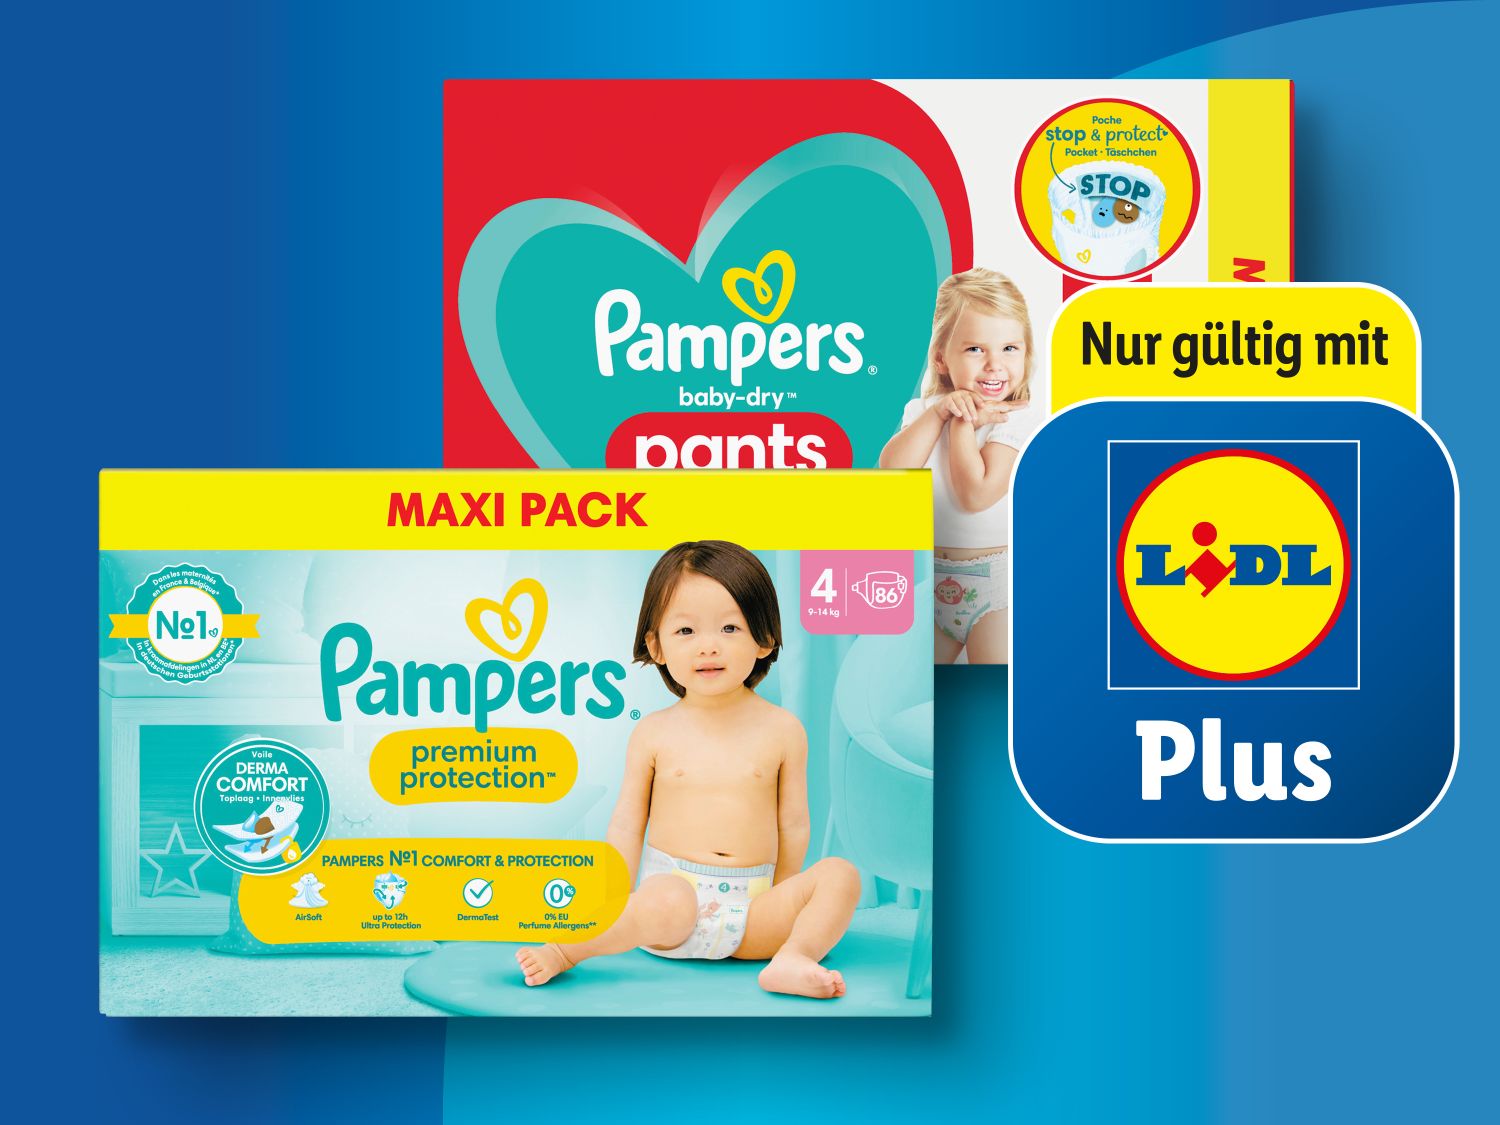 Pampers Premium Protection/Baby Dry/Pants - Lidl